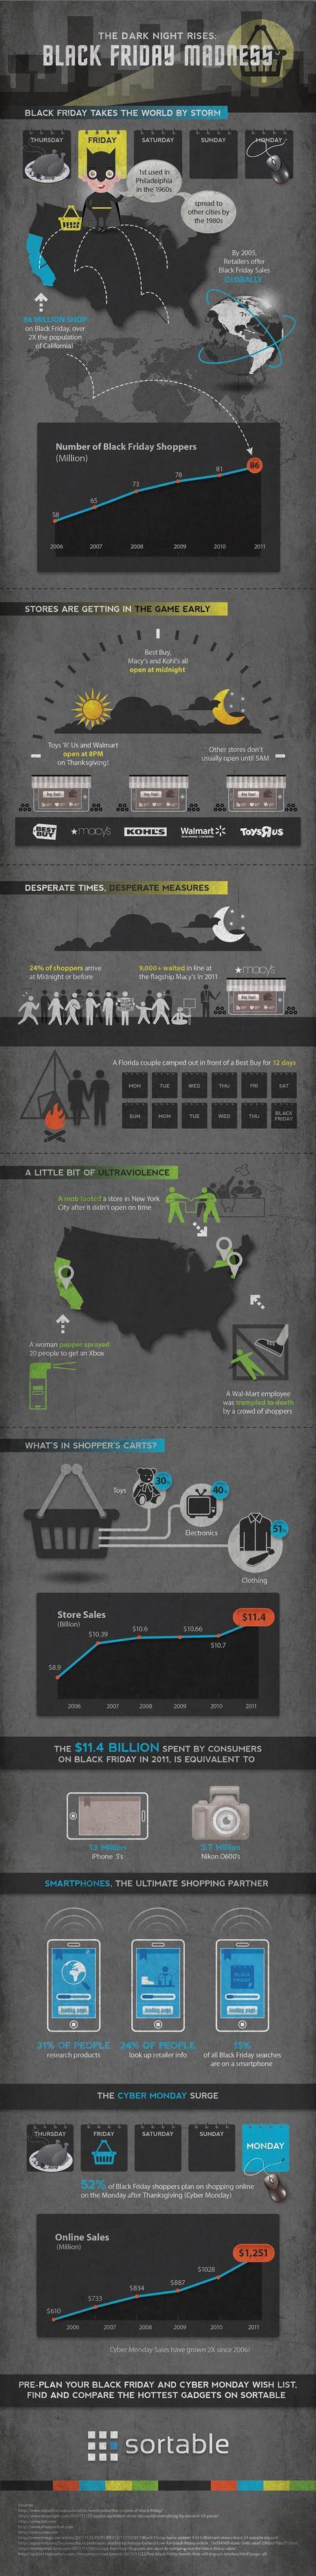 Black Friday Madness Infographic